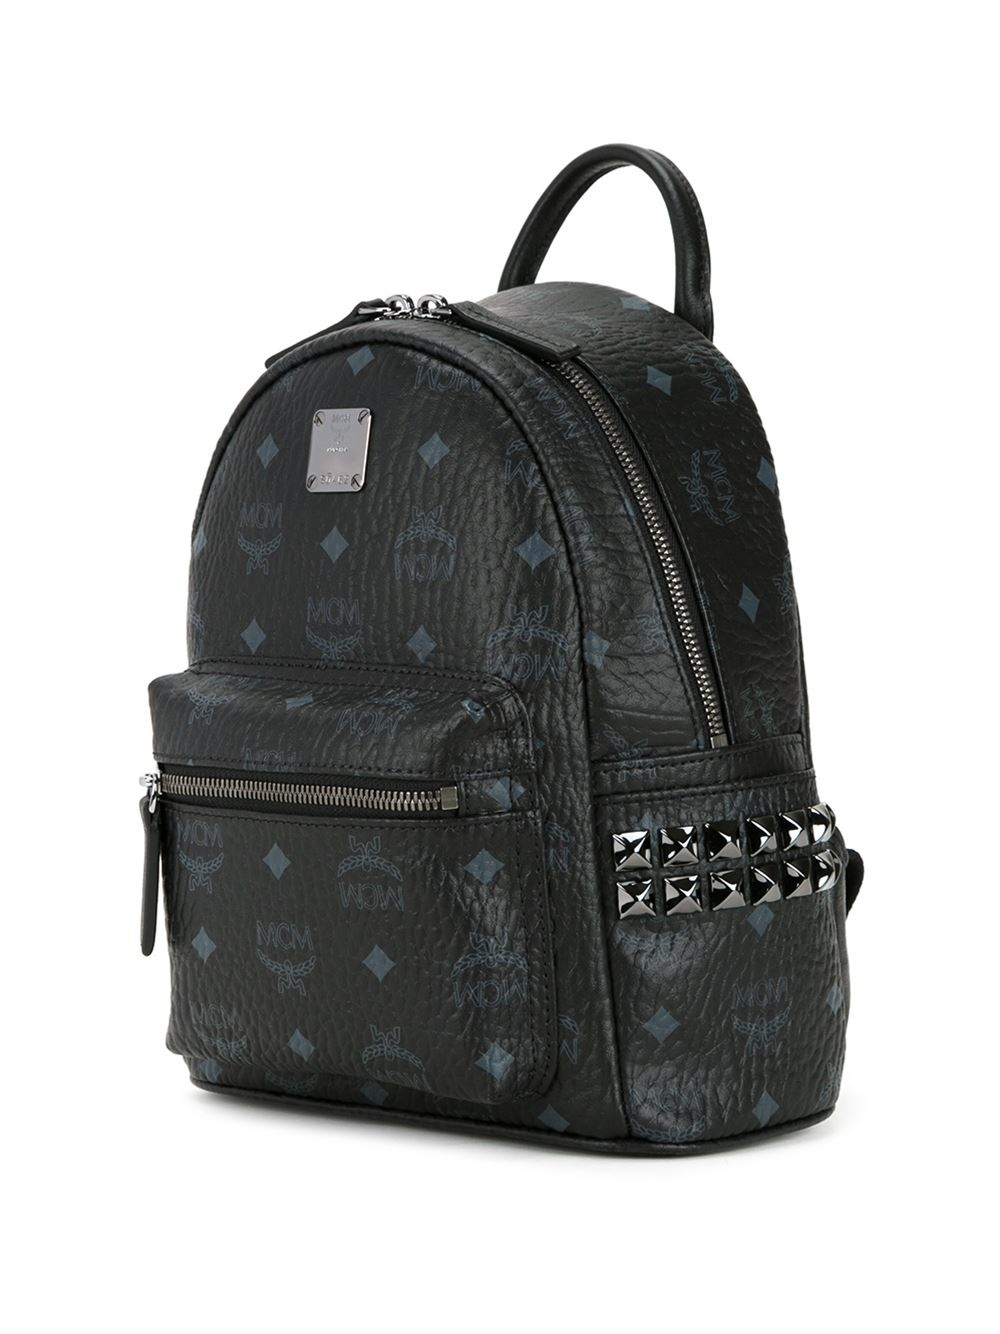 Mcm Small Stark Backpack in Black | Lyst